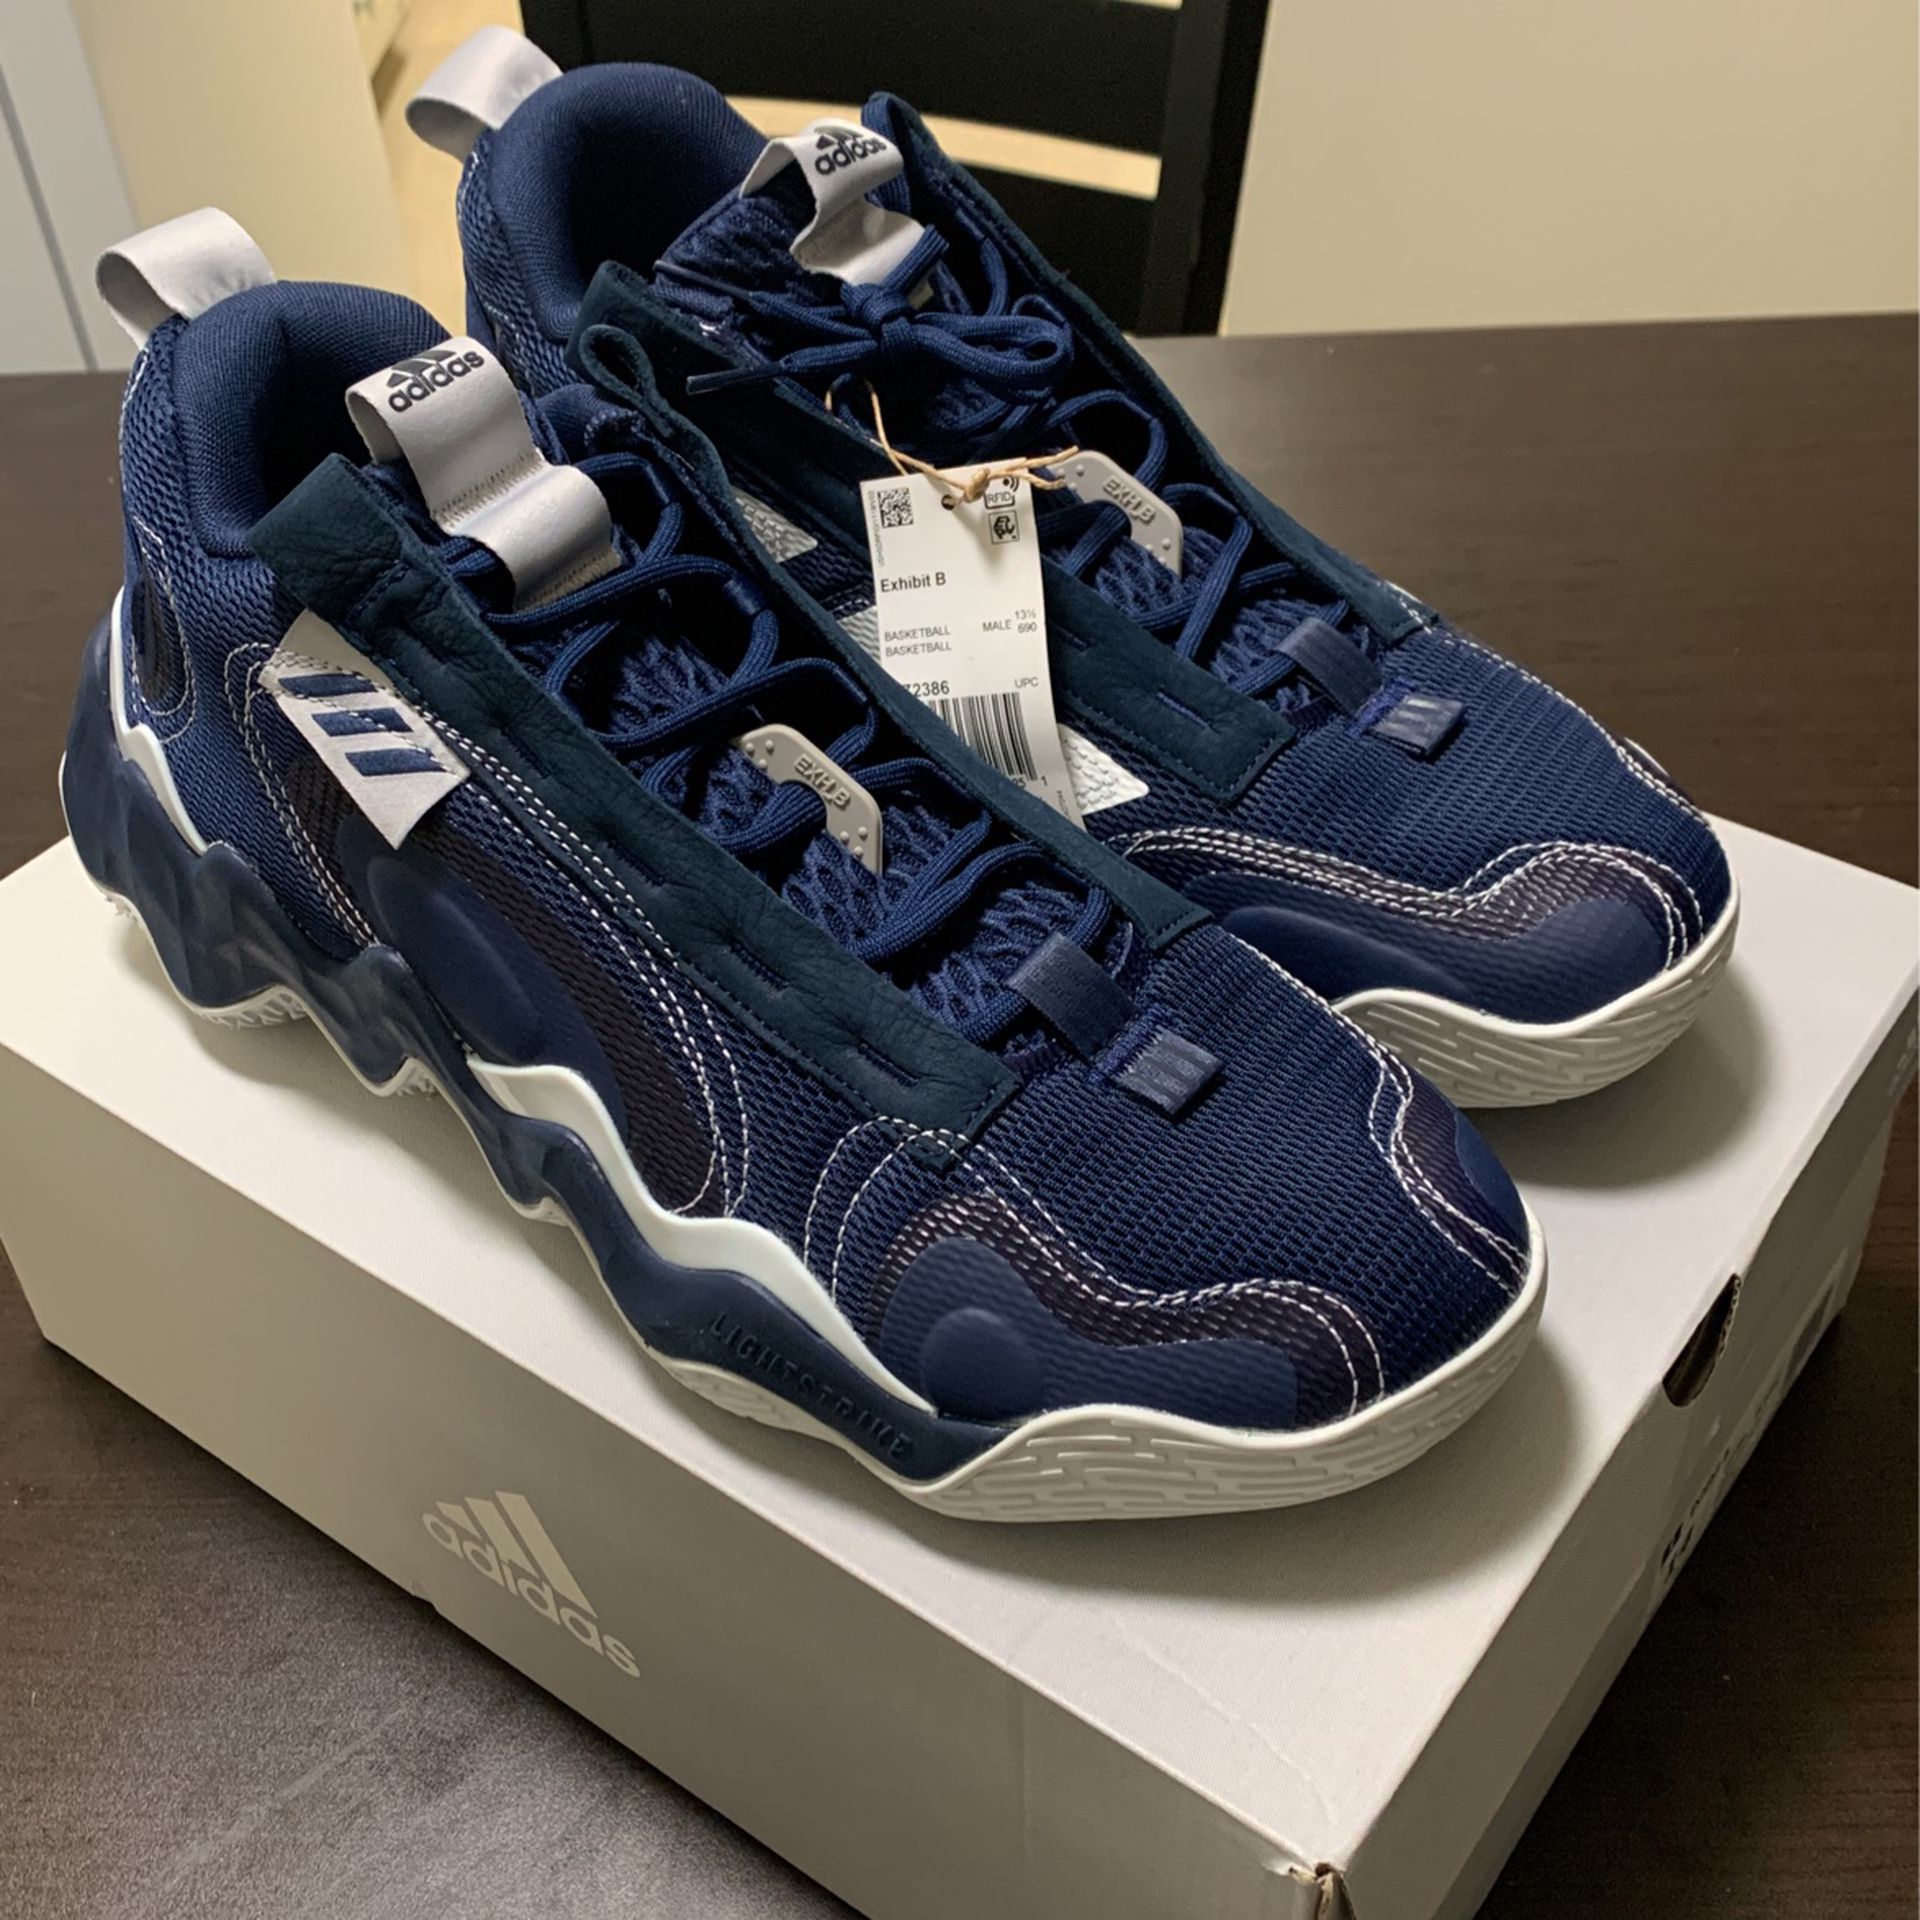 NEW Adidas Exhibit B Size 14 Basketball for Sale in Riverside, CA - OfferUp